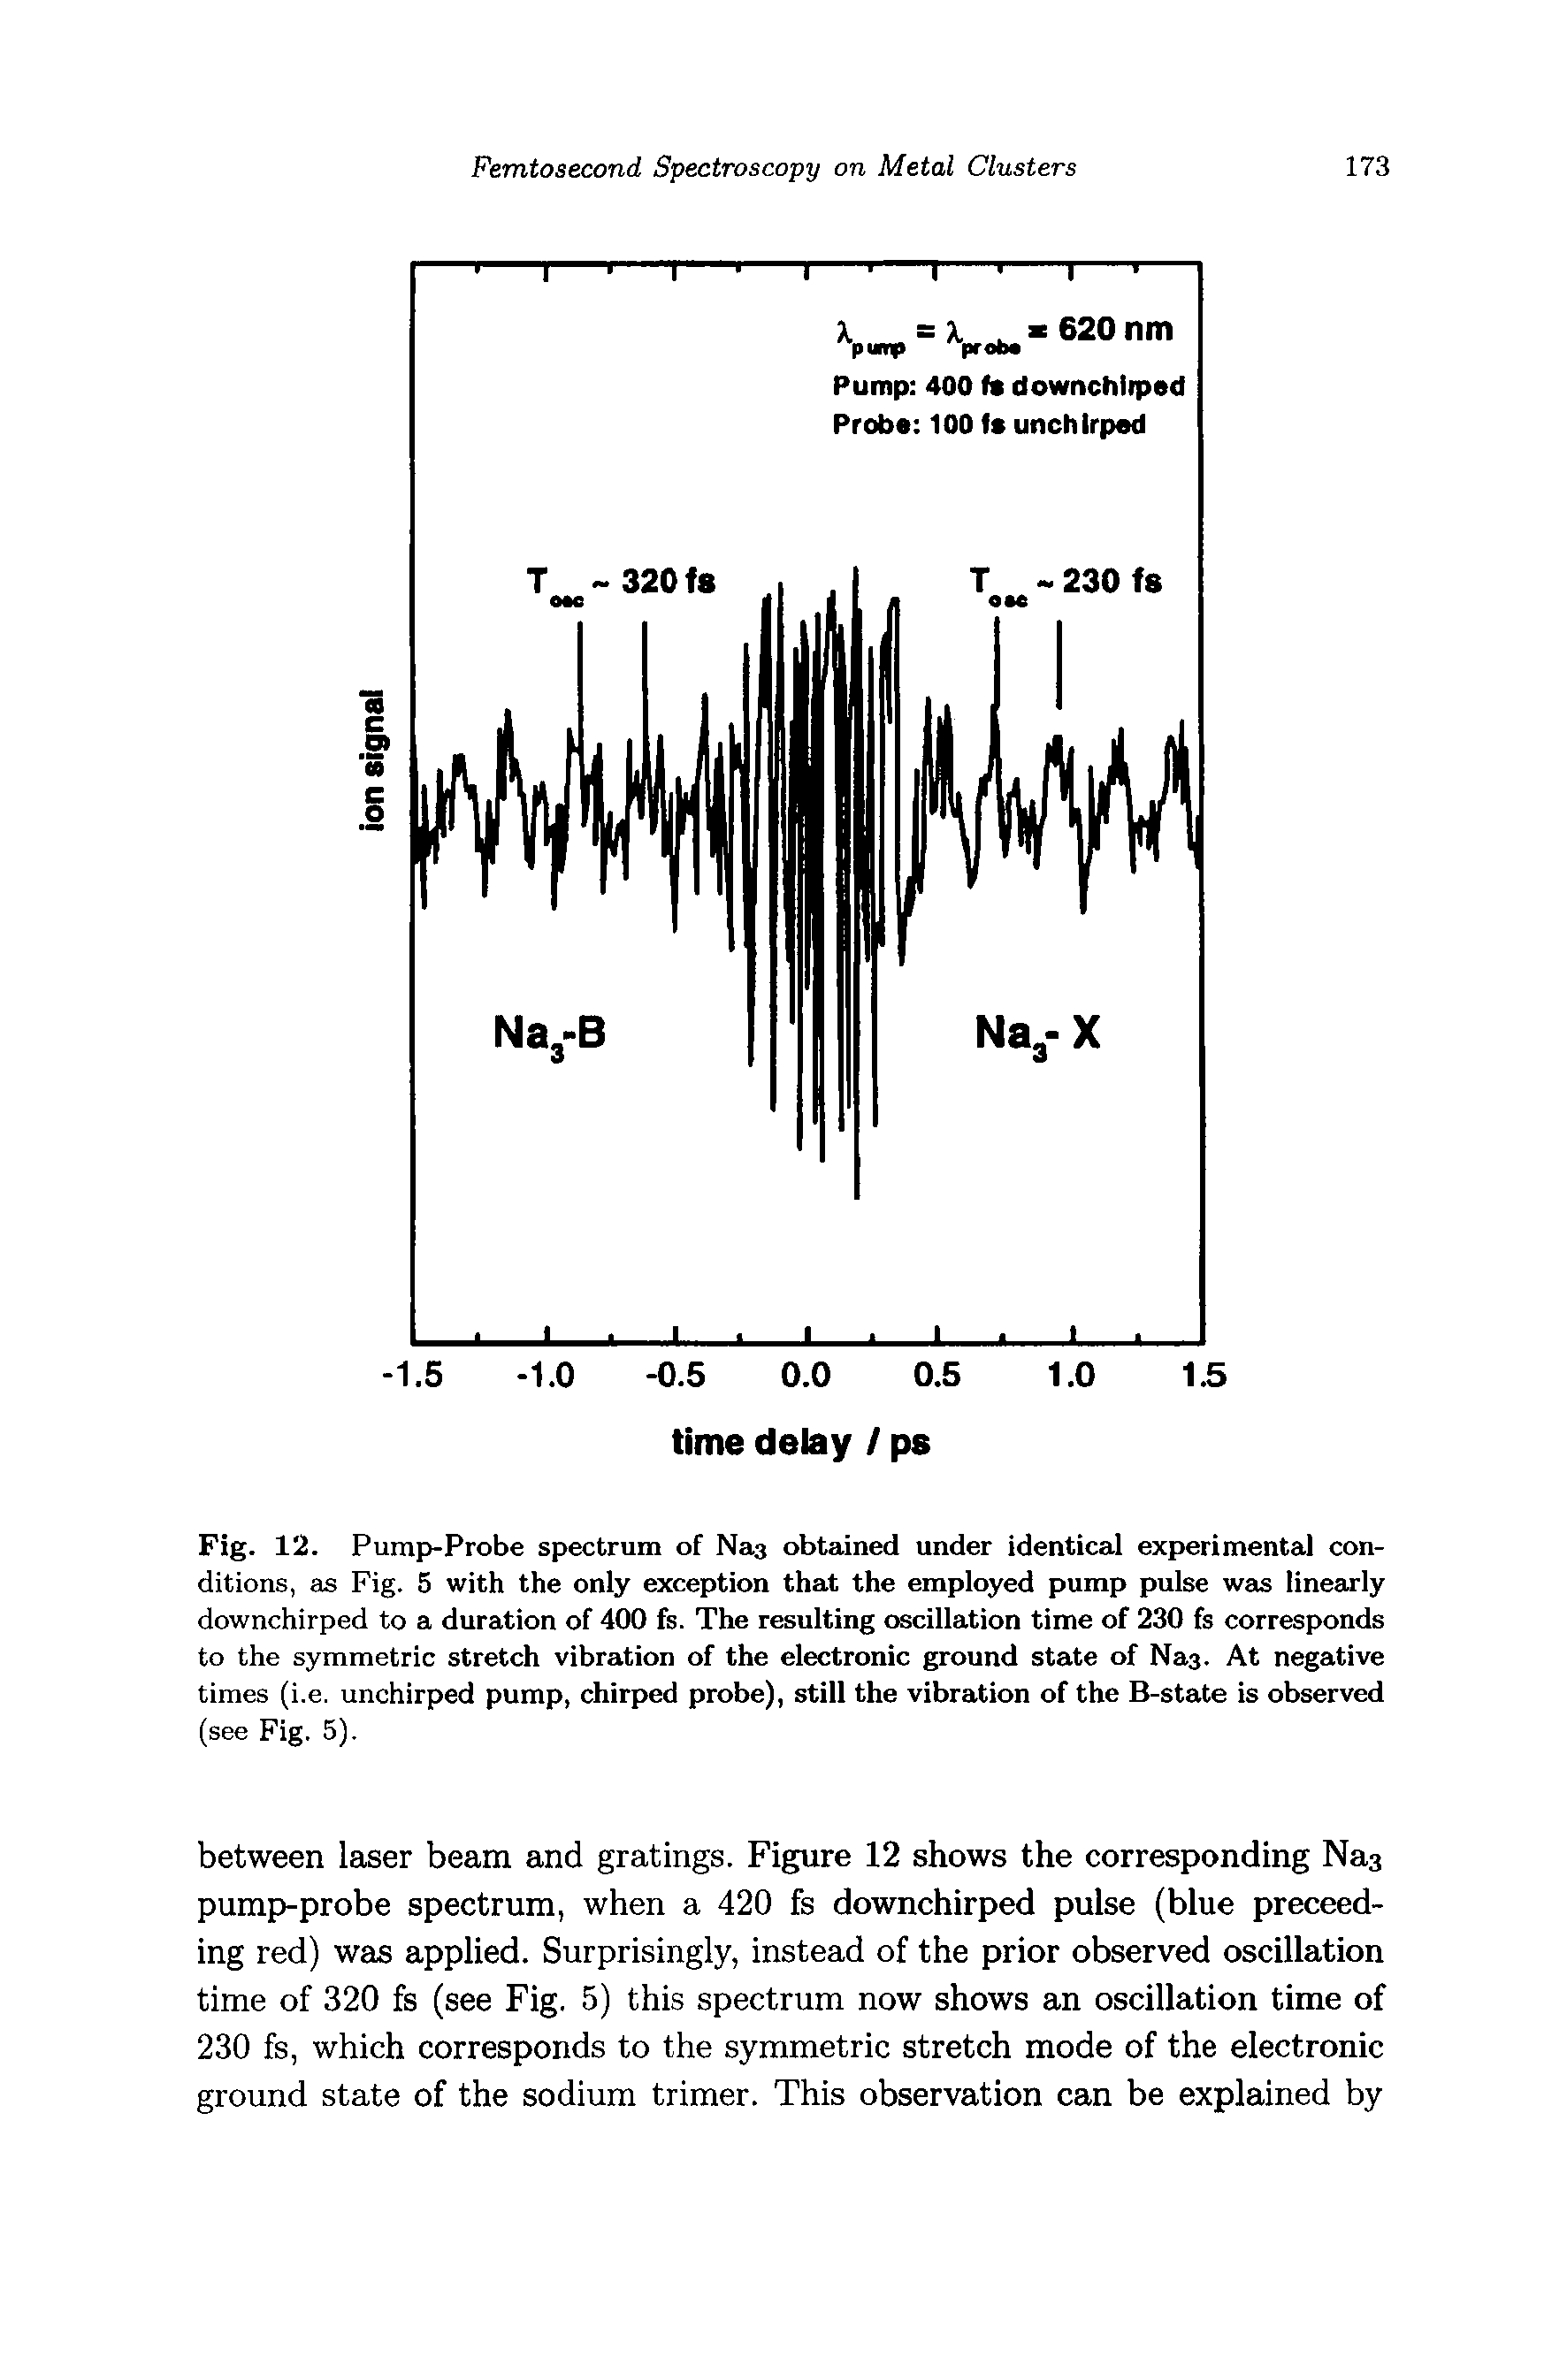 Fig. 12. Pump-Probe spectrum of Nas obtained imder identical experimented conditions, as Fig. 5 with the only exception that the employed pump pulse was linearly downchirped to a duration of 400 fe. The resulting oscillation time of 230 fis corresponds to the symmetric stretch vibration of the electronic ground state of Nas. At negative times (i.e. unchirped pump, chirped probe), still the vibration of the B-state is observed (see Fig. 5).